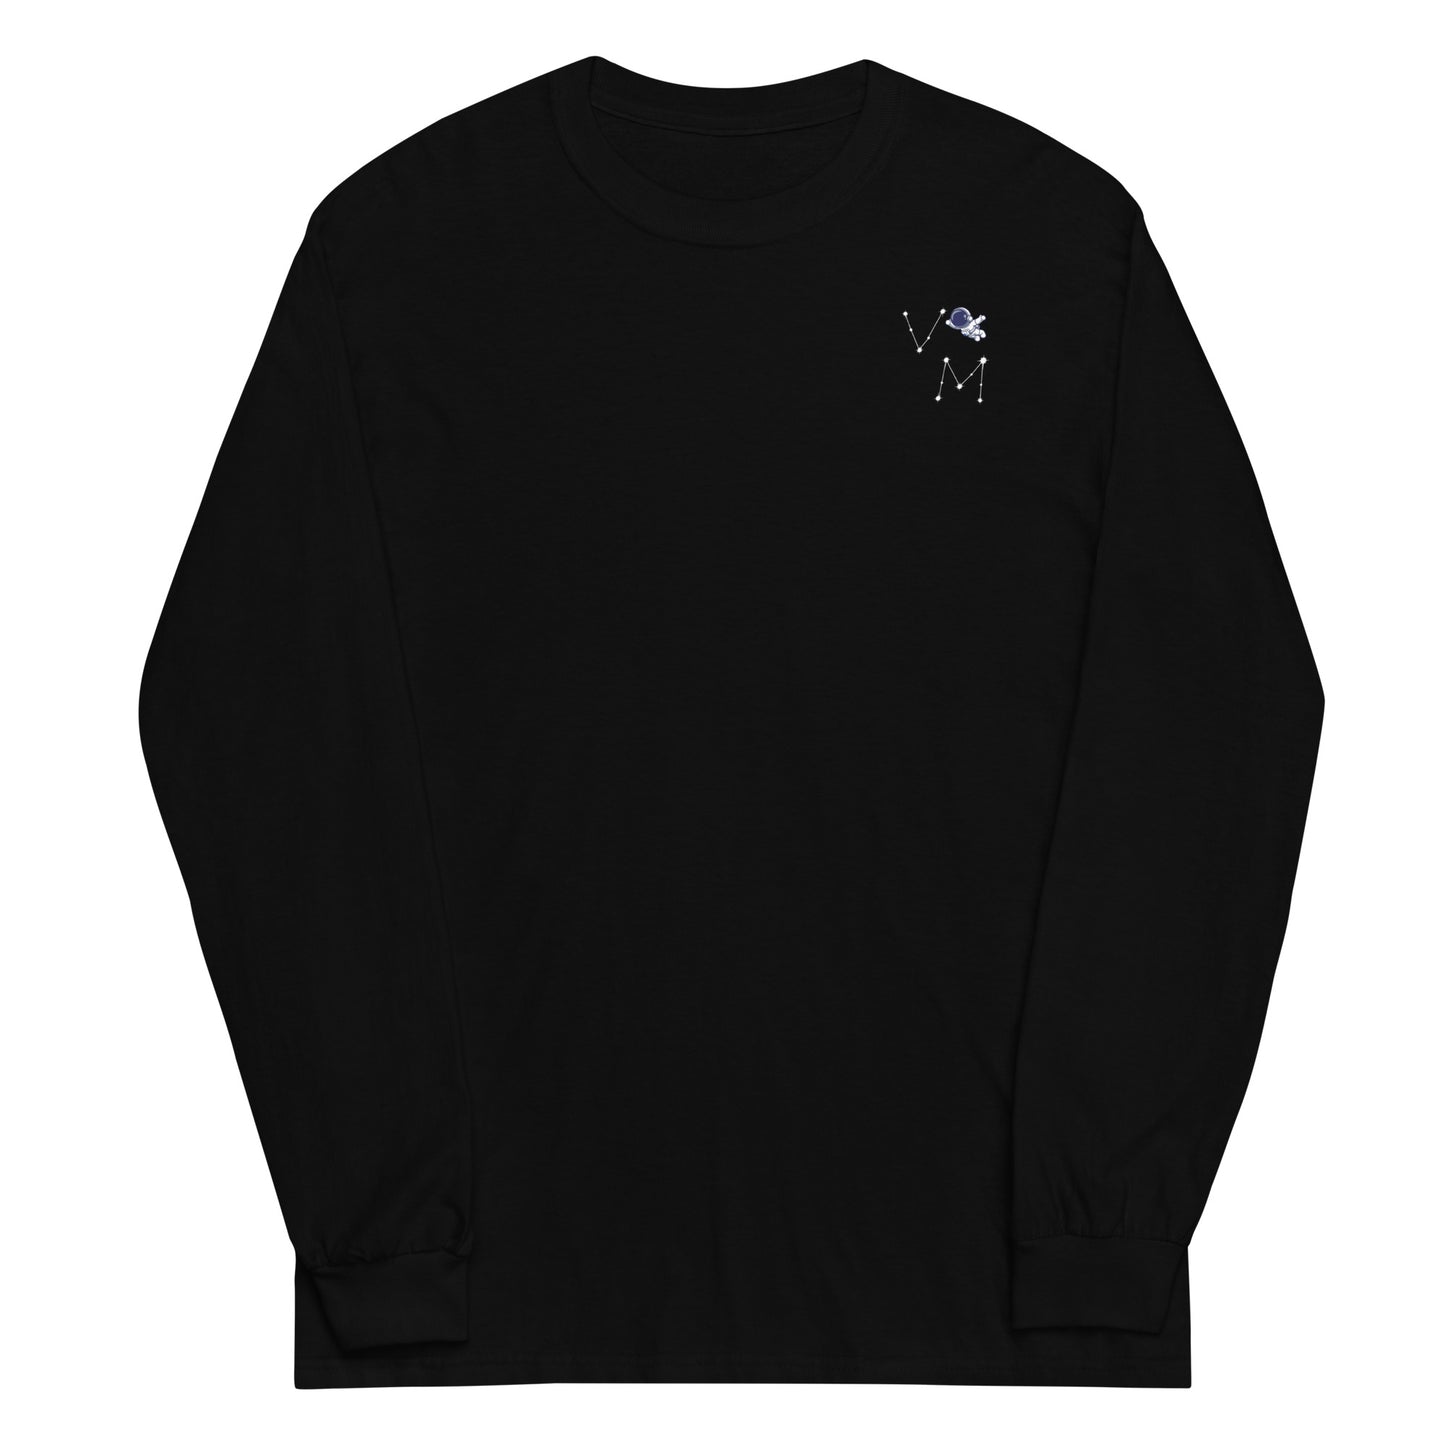 Reaching for the Stars Long Sleeve